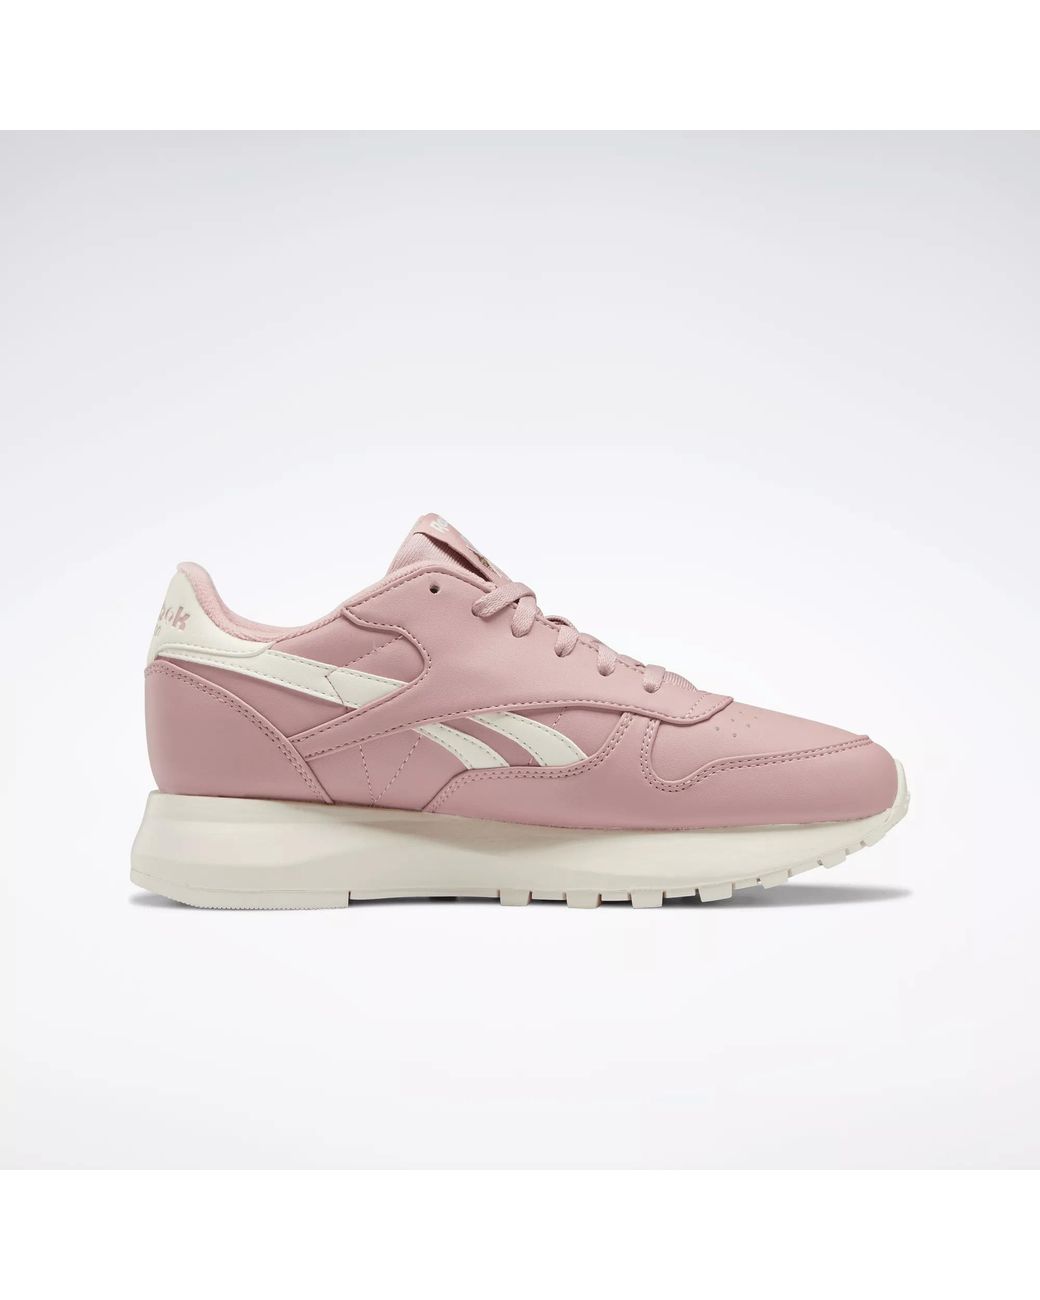 Reebok Classic Leather Sp Shoes in Pink | Lyst